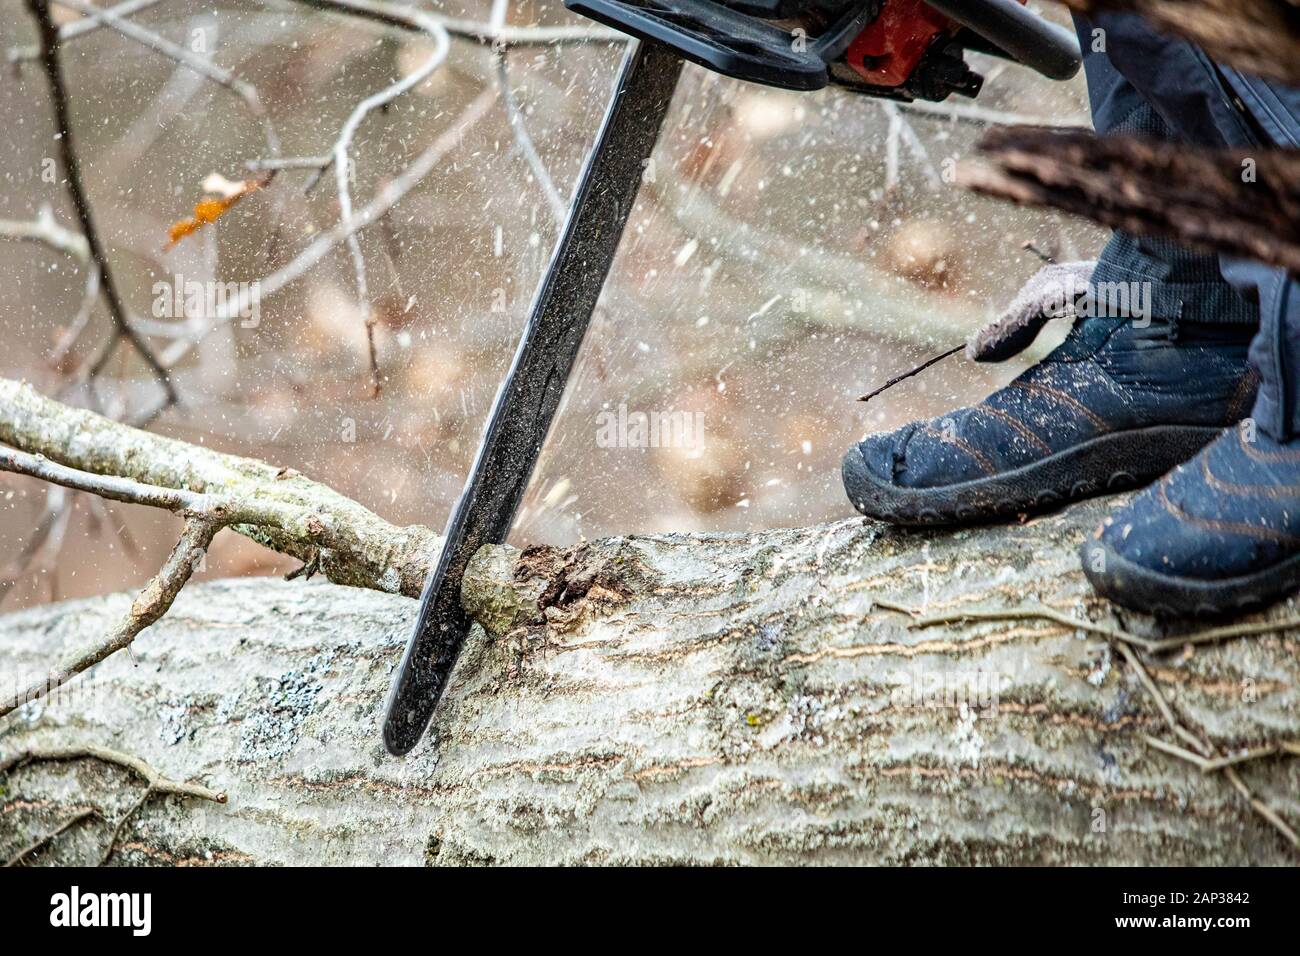 A working arborist wearing climbing gear and toting a chain saw